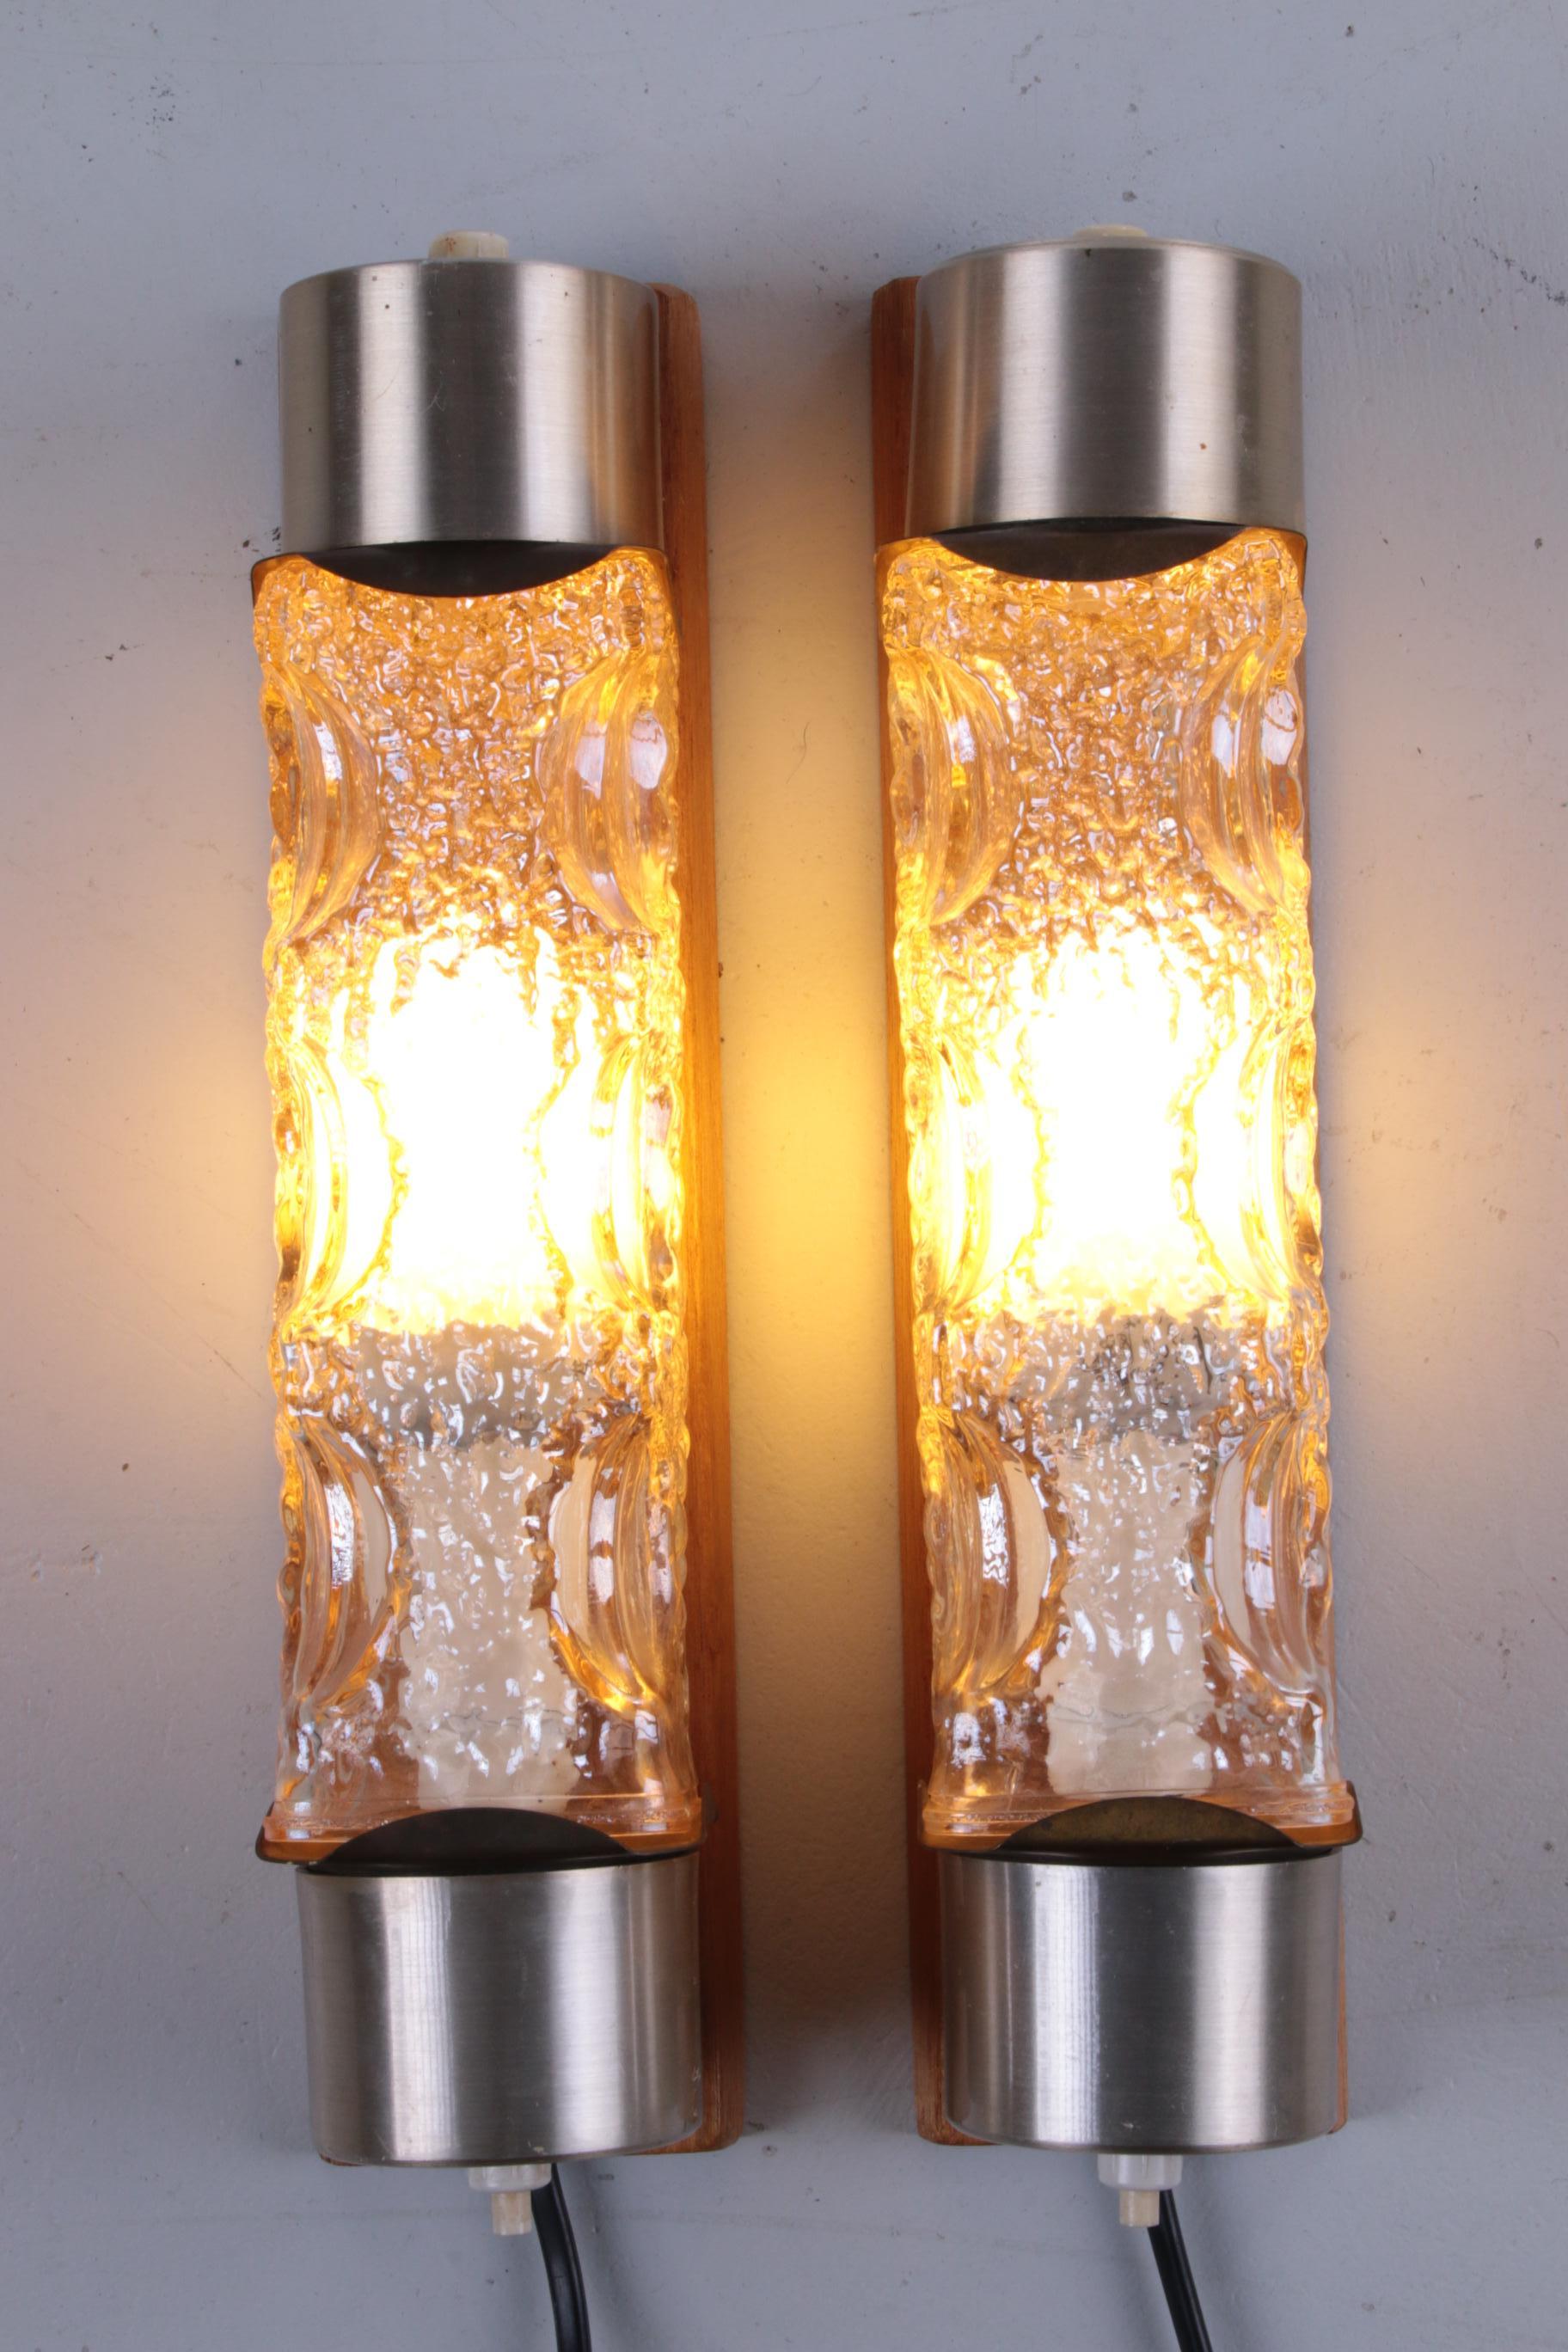 This is a beautiful and elegant set of vintage wall lamps. They are mounted on an oak shelf with two chrome covers and a thick glass shade in between that diffuses the light and gives of a wonderfull warm glow when the lamp is turned on.

The